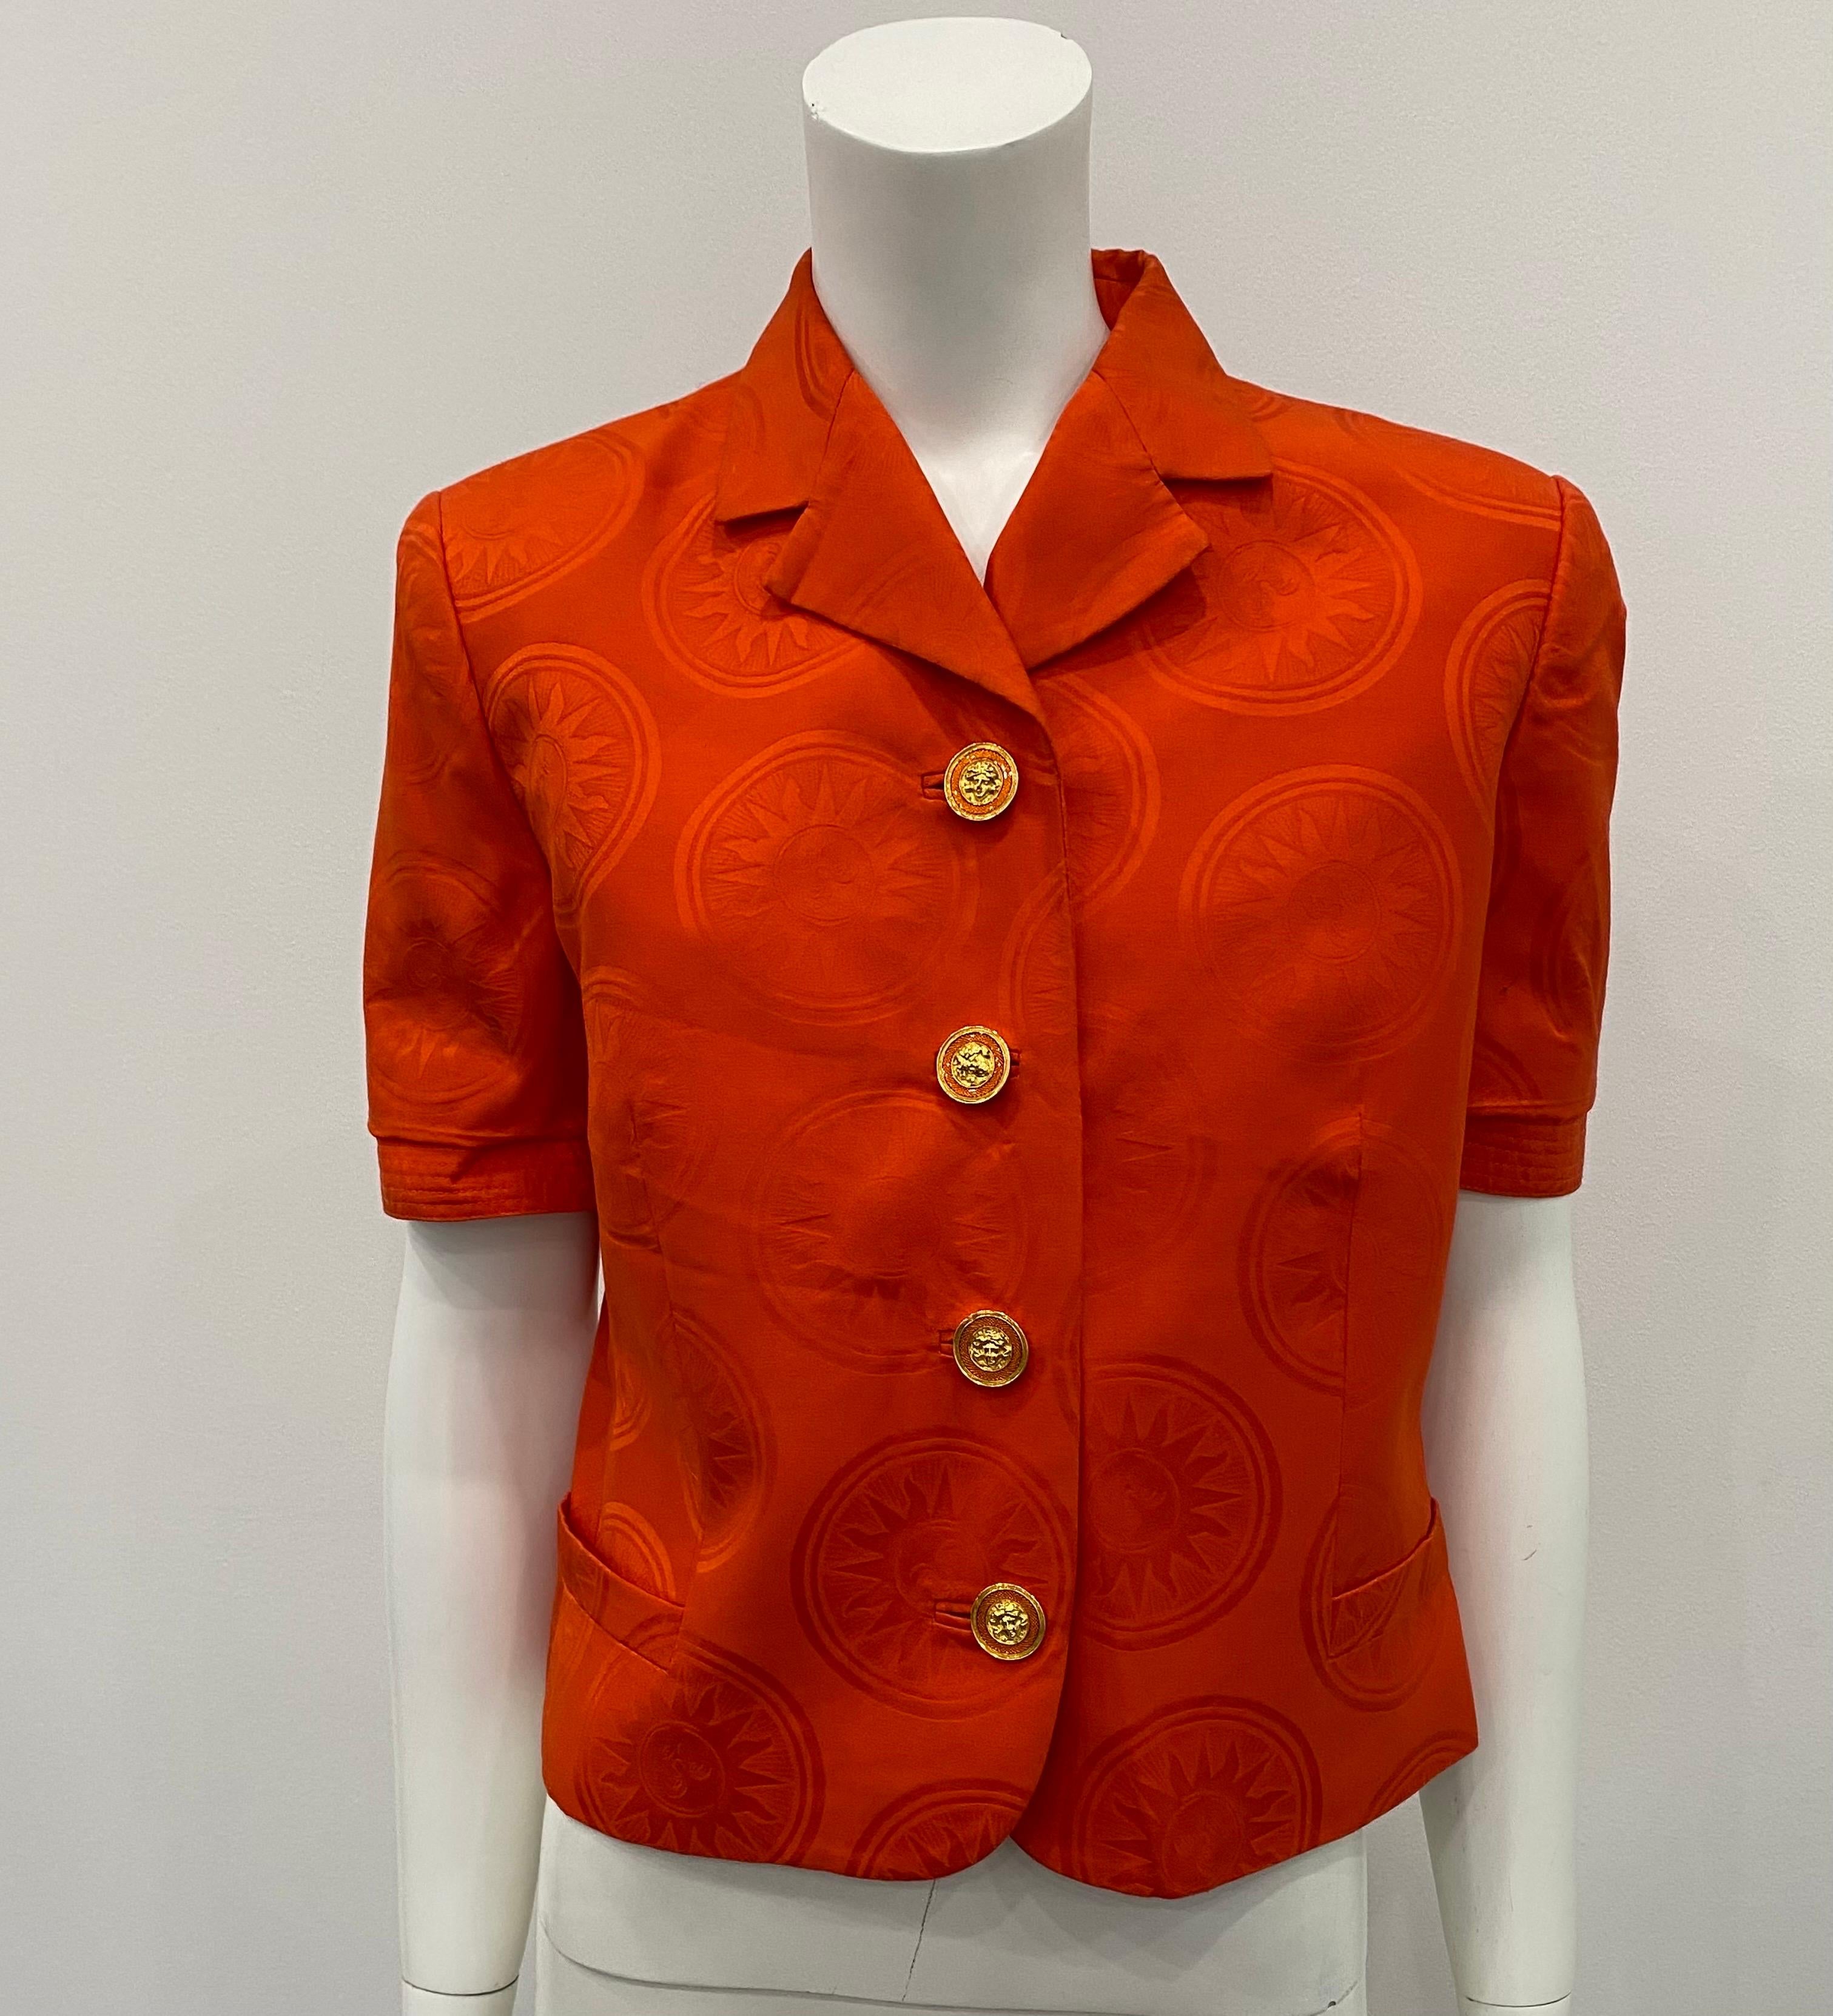 Gianni Versace Couture Orange Silk Damask Sun Pattern Short Sleeve Jacket/Top - Circa 90’s. This fantastic and highly collectible piece has an incredibly vibrant orange damask color, 4 front gold and orange spectacular Versace buttons, short sleeve